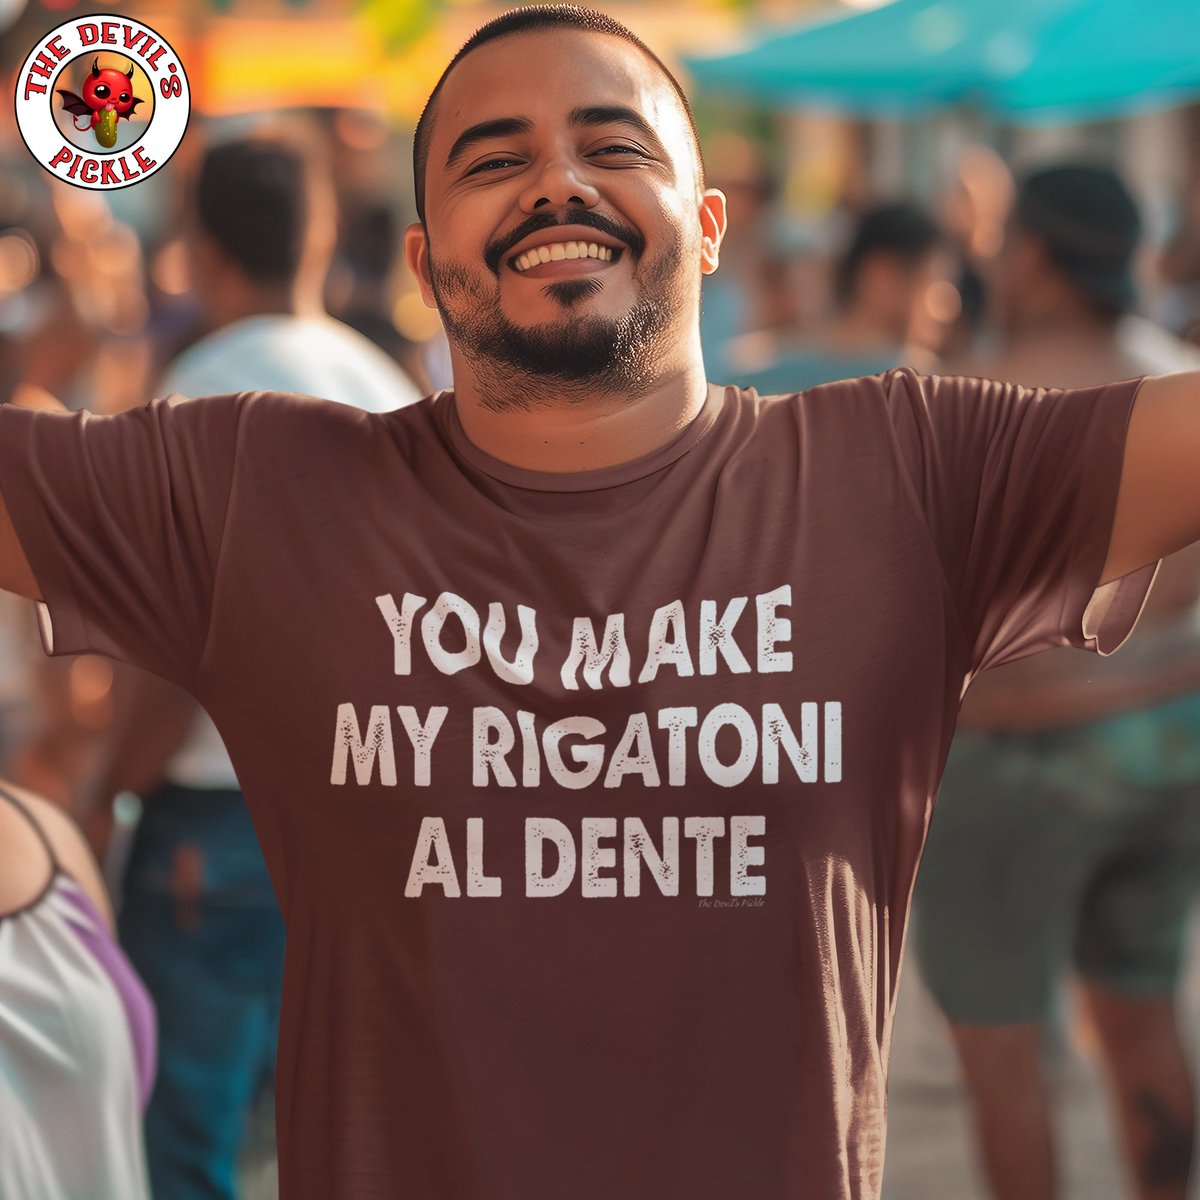 Just like my rigatoni, our love is perfectly al dente 💕 Let everyone know just how Al Dente they make you! The Devil's Pickle Tees and More!

#tshirtgoals #funnyapparel #suggestive #freeshipping #adultmeme #adulttees #thedevilspickle #adulthumor #offensivetshirts #funshirts